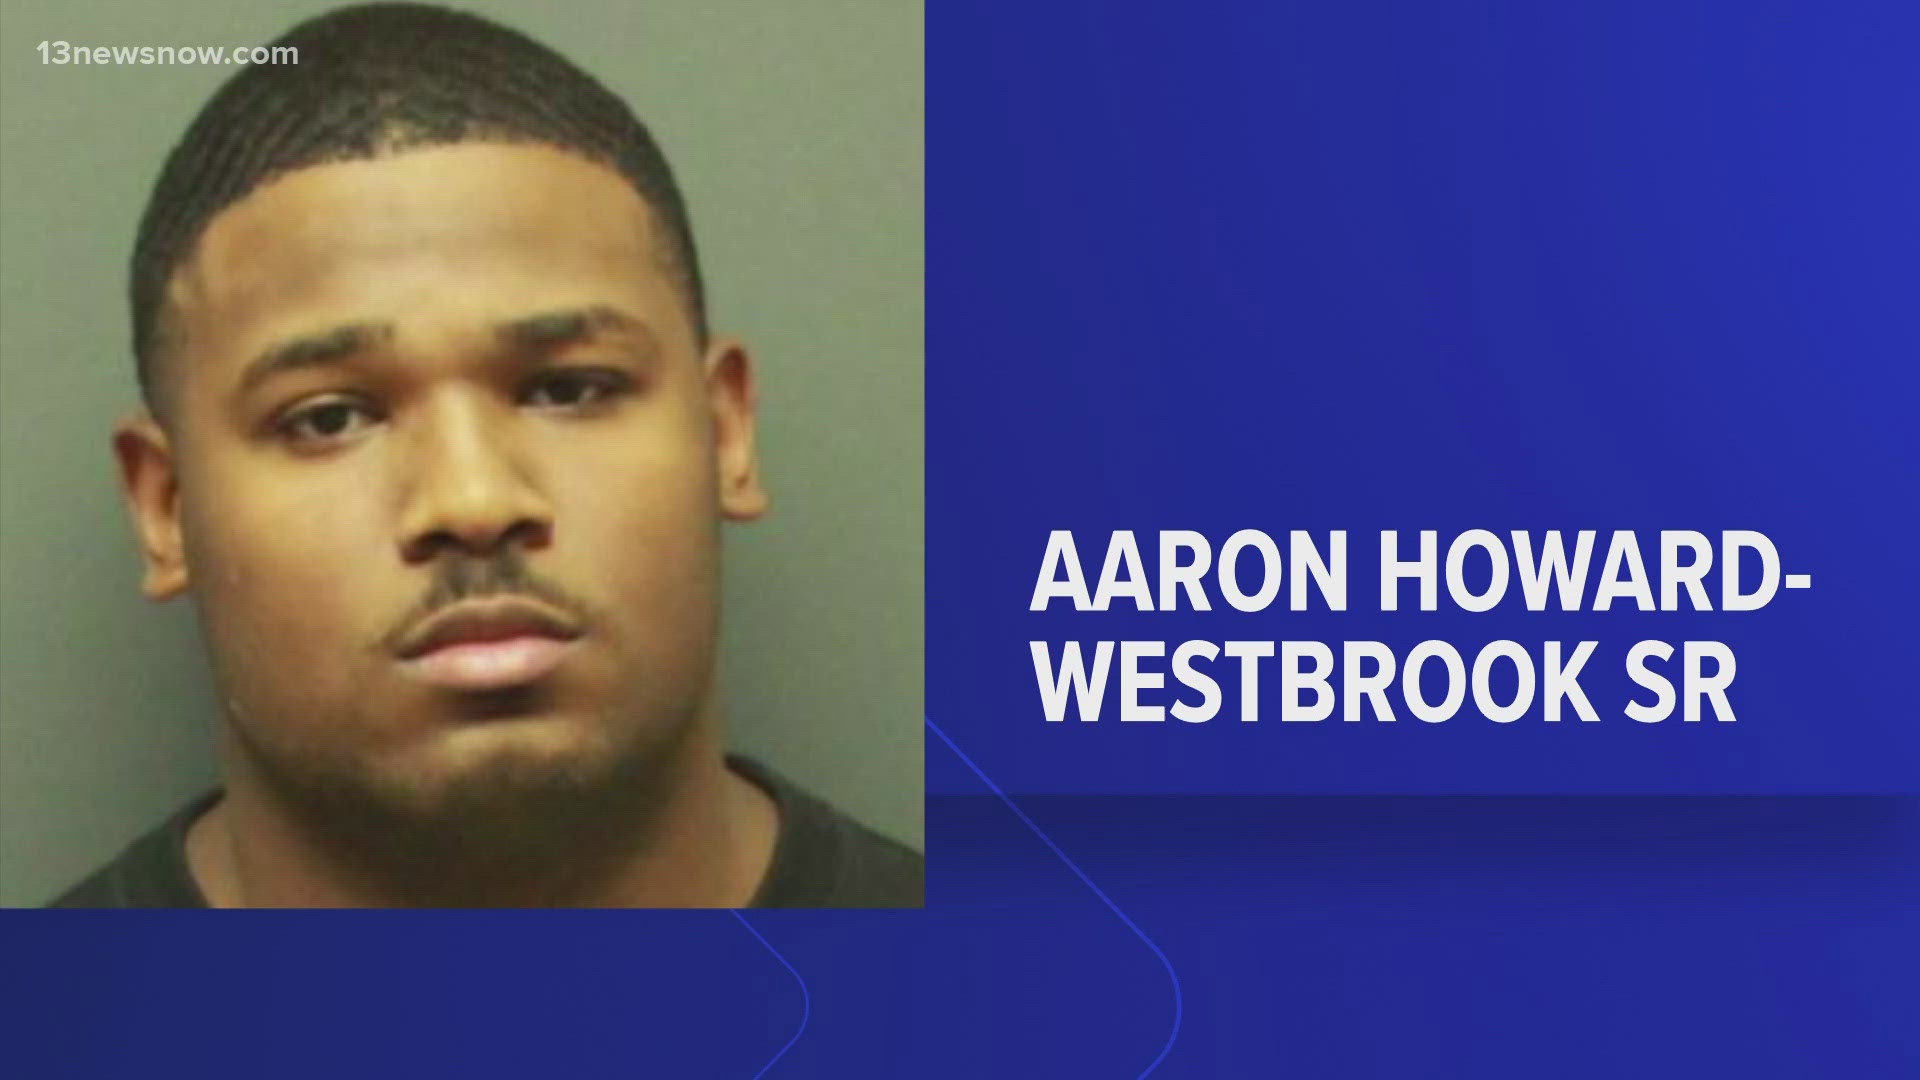 Tonight, a Newport News man is behind bars charged in connection with the death of his four-month-old son.